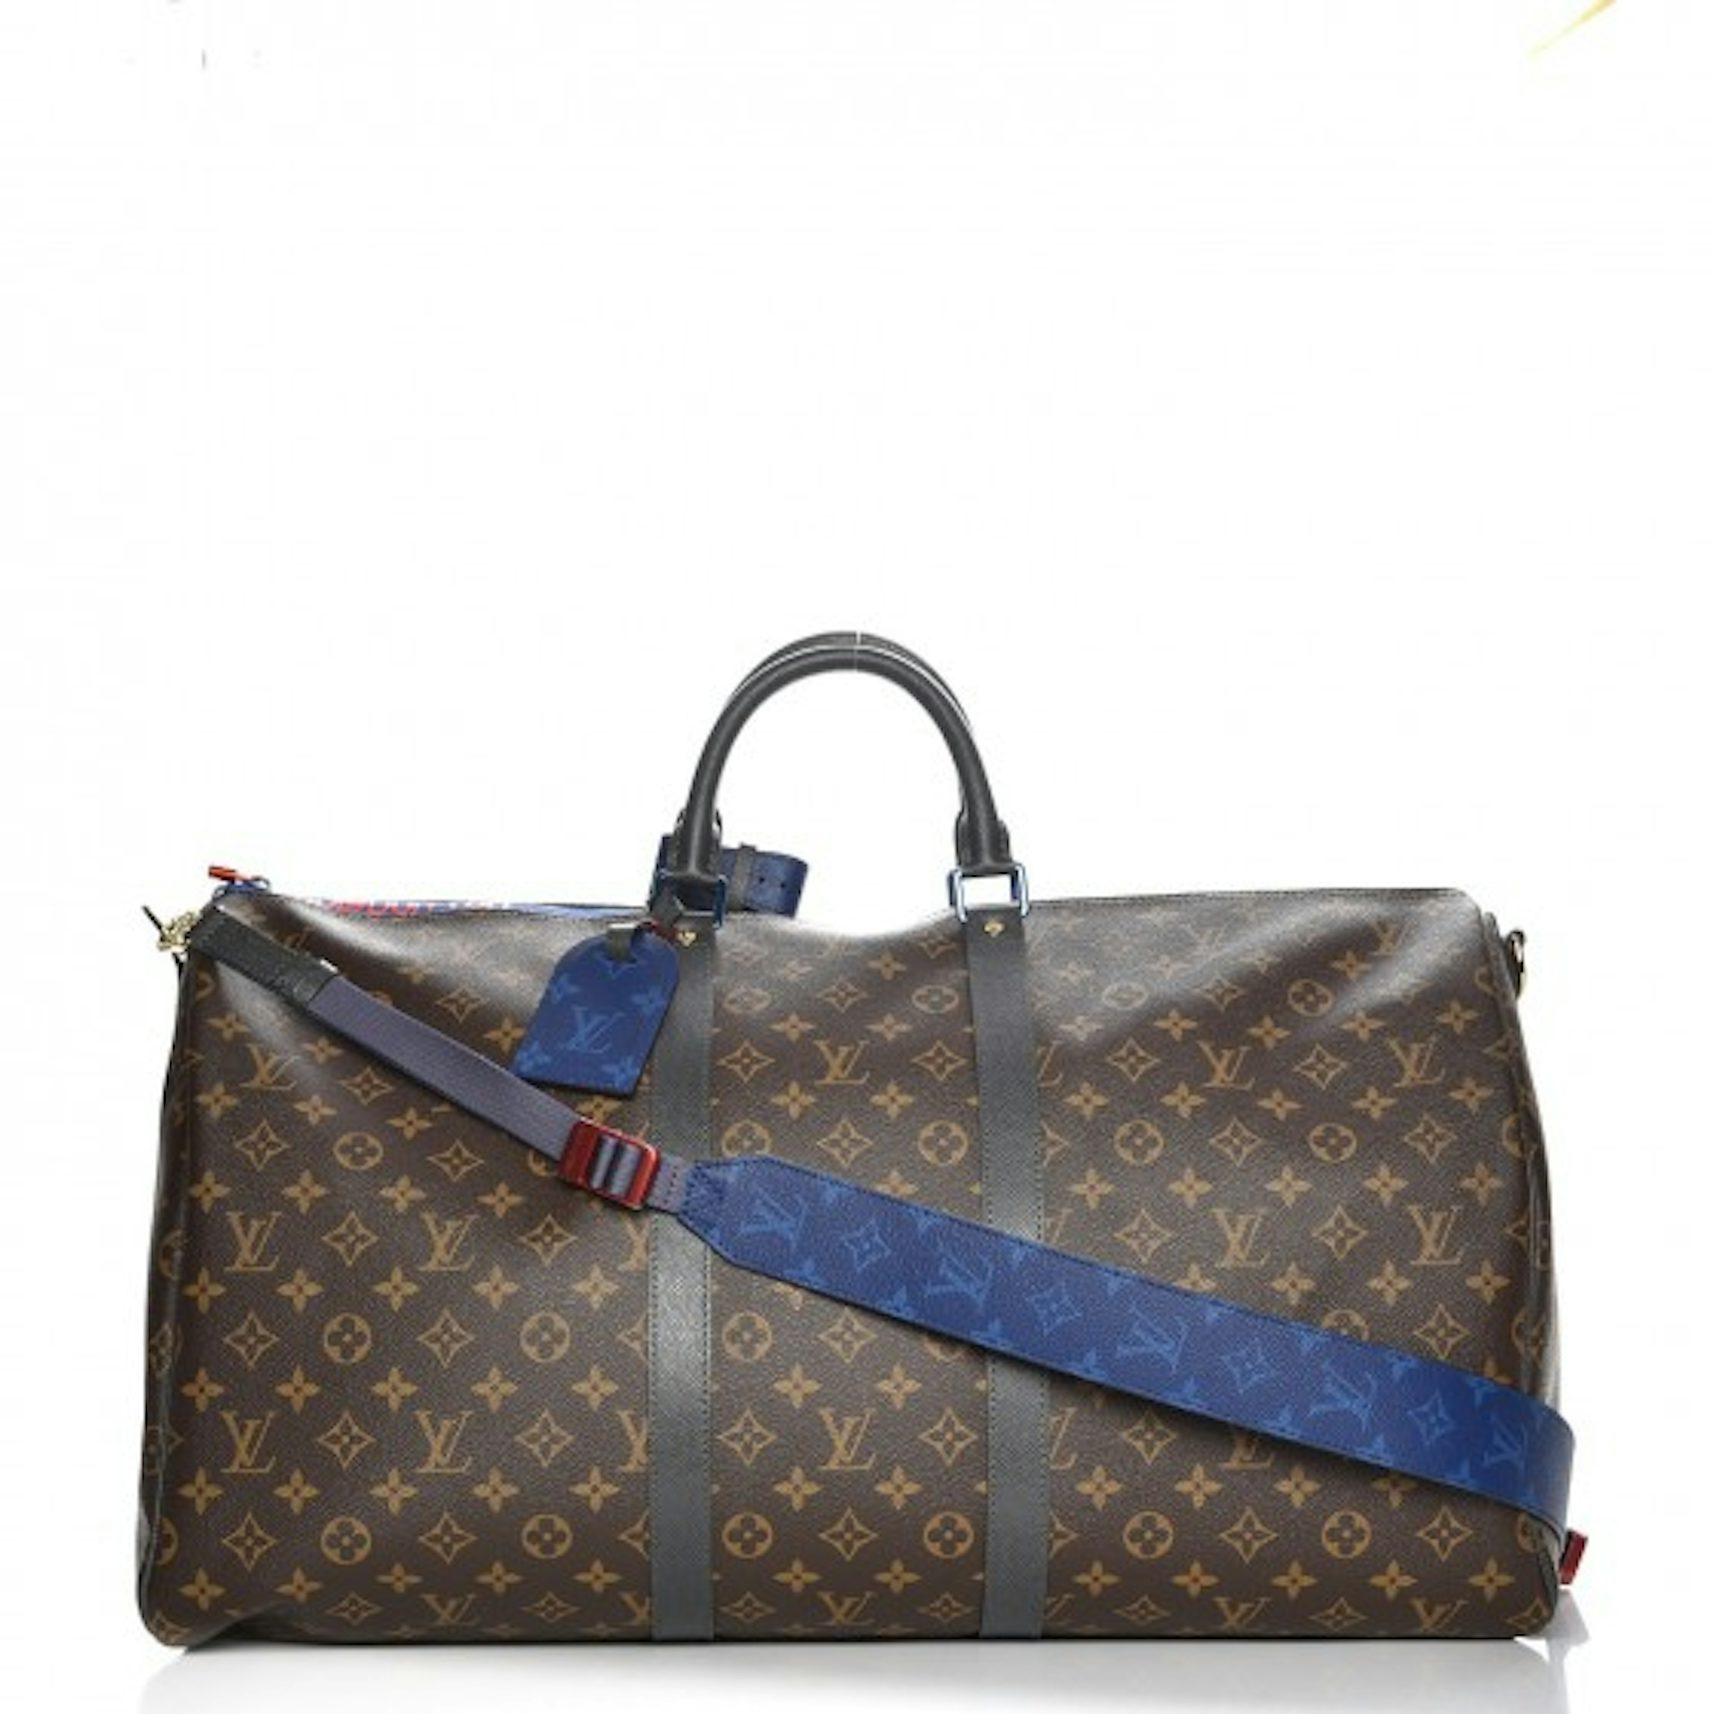 Louis Vuitton Keepall Bandouliere Monogram Outdoor 55 Brown in